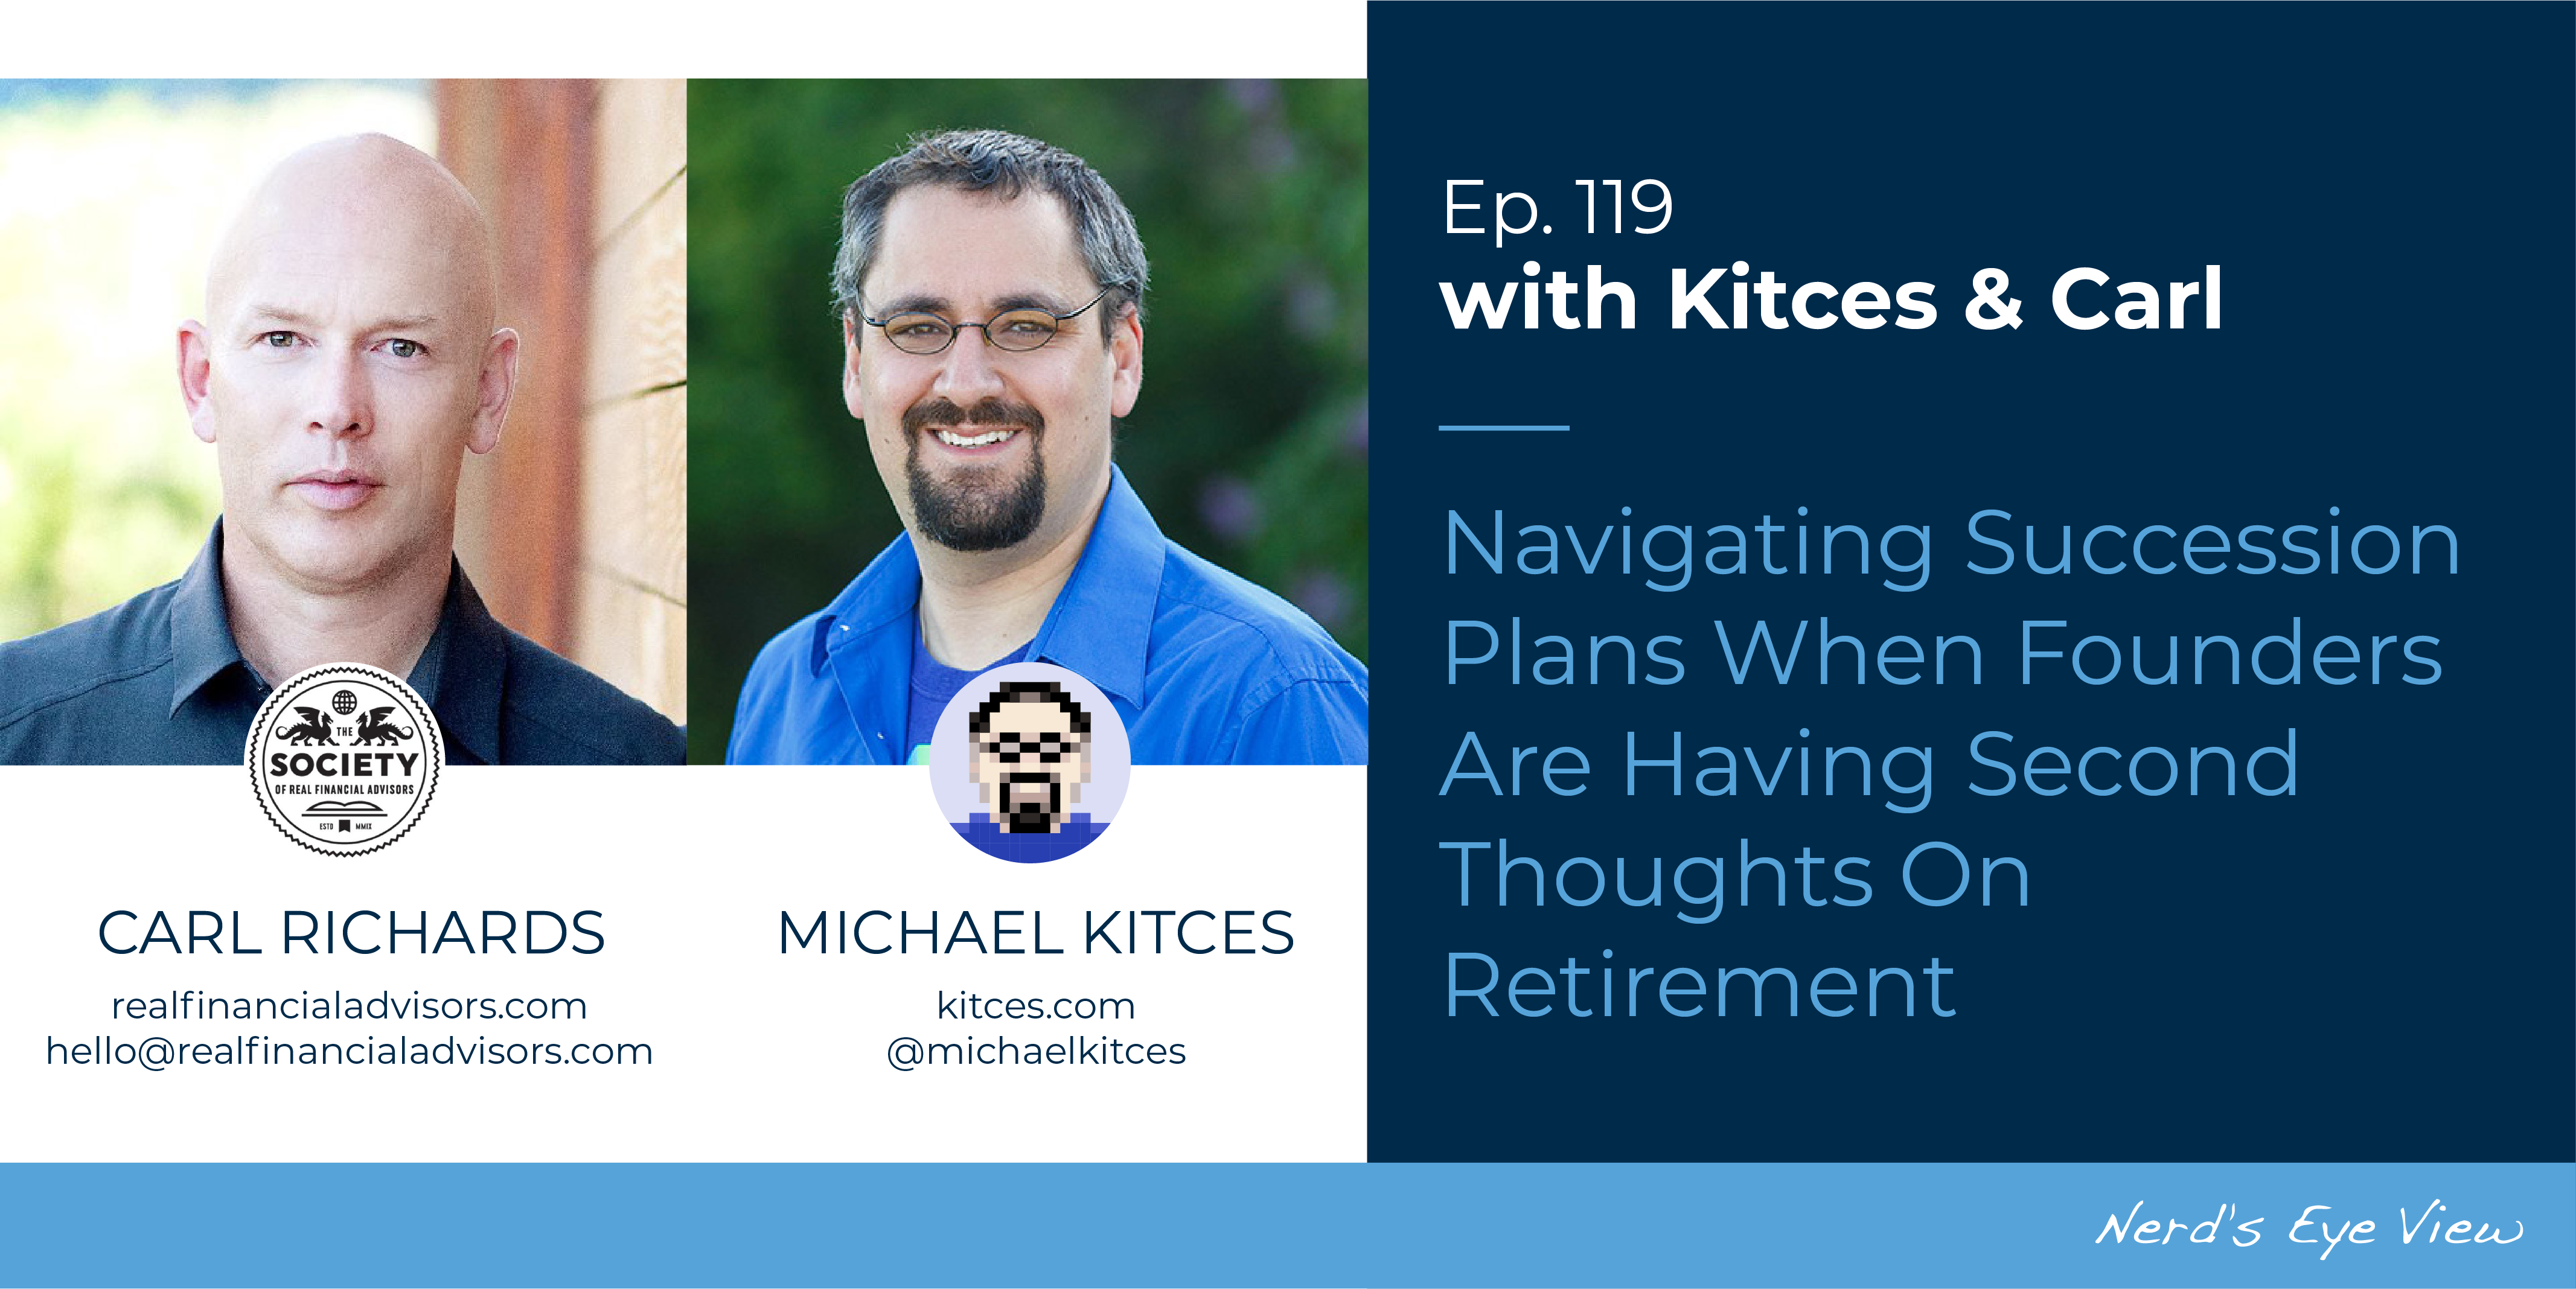 Kitces & Carl Ep 119: Navigating Succession Plans When Founders Are Having Second Ideas On Retirement